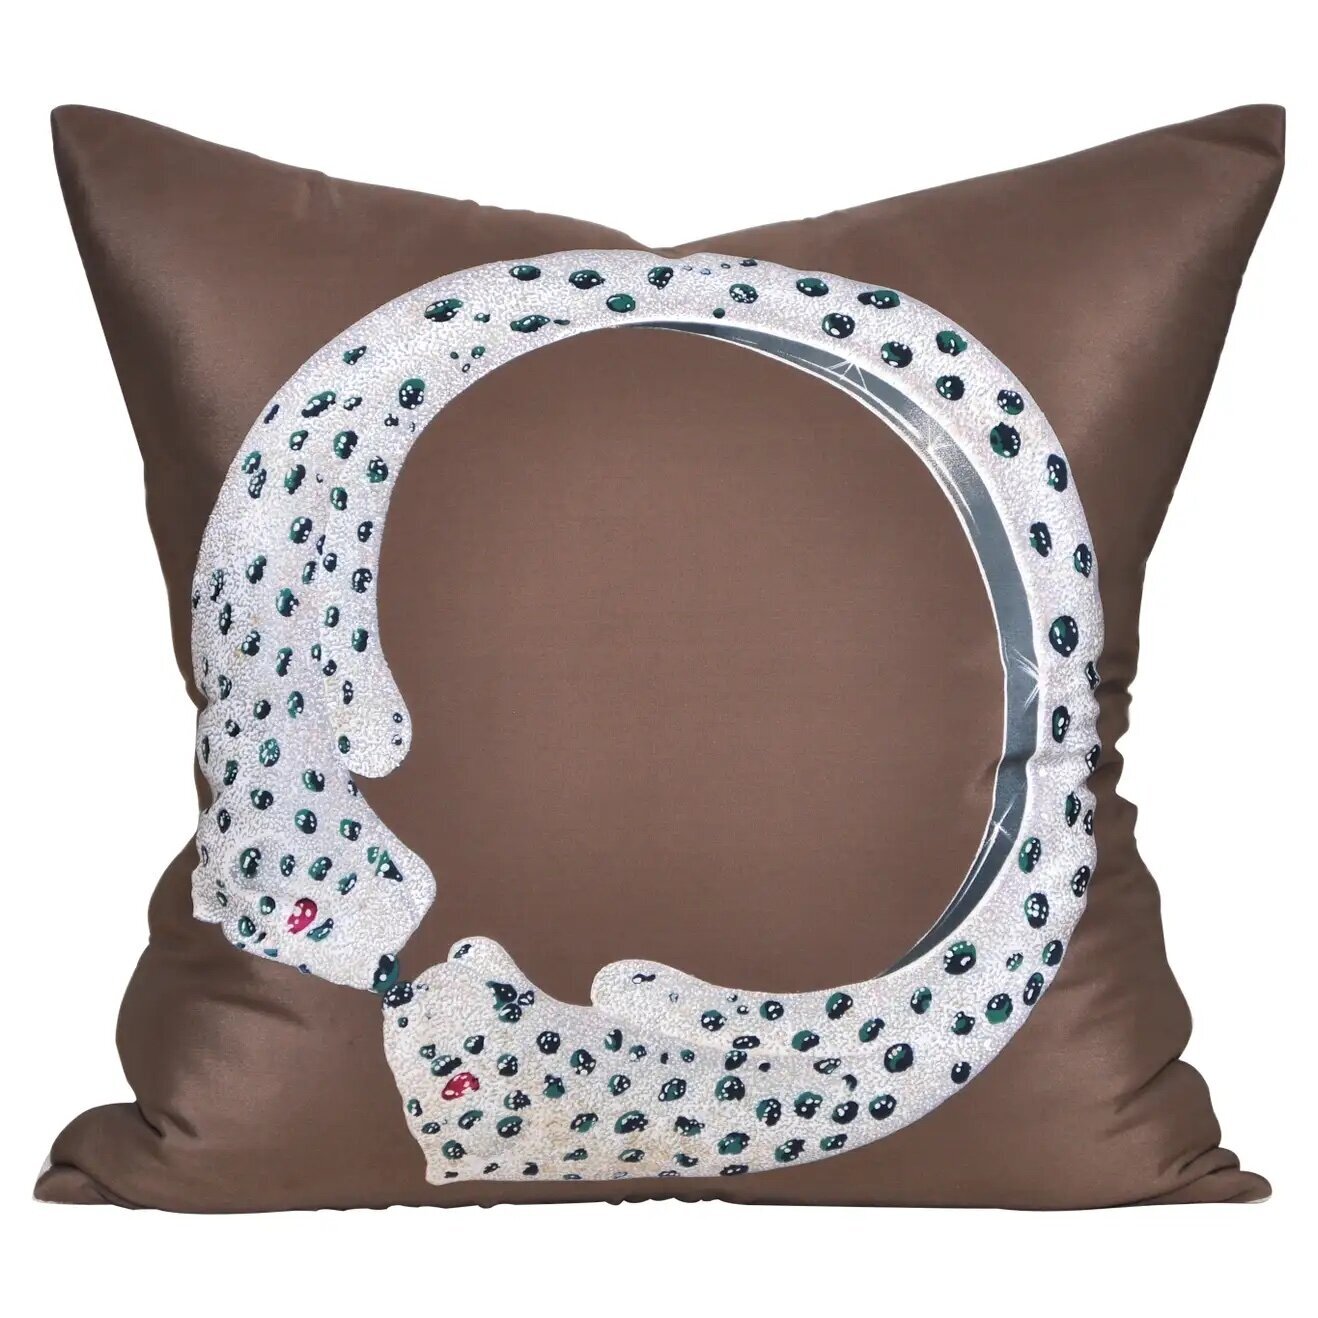 Katie+Larmour+vintage+Cartier+silk+scarf+backed+in+pure+Irish+Linen+cushion+pillow+brown+++copy.jpg